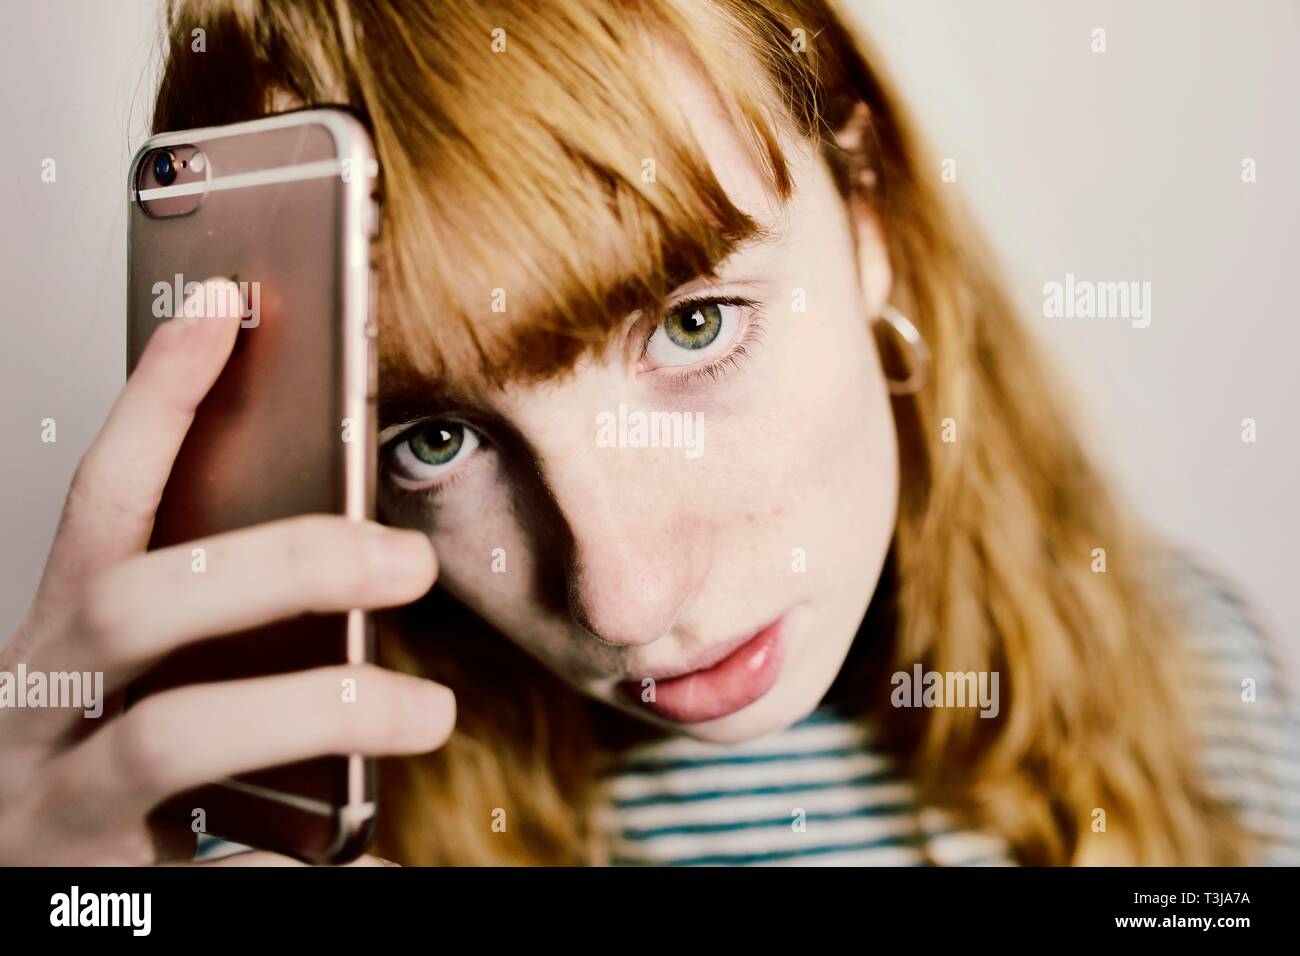 Girl, teenager, red-haired, holds annoyed smartphone to head, studio shot, Germany Stock Photo